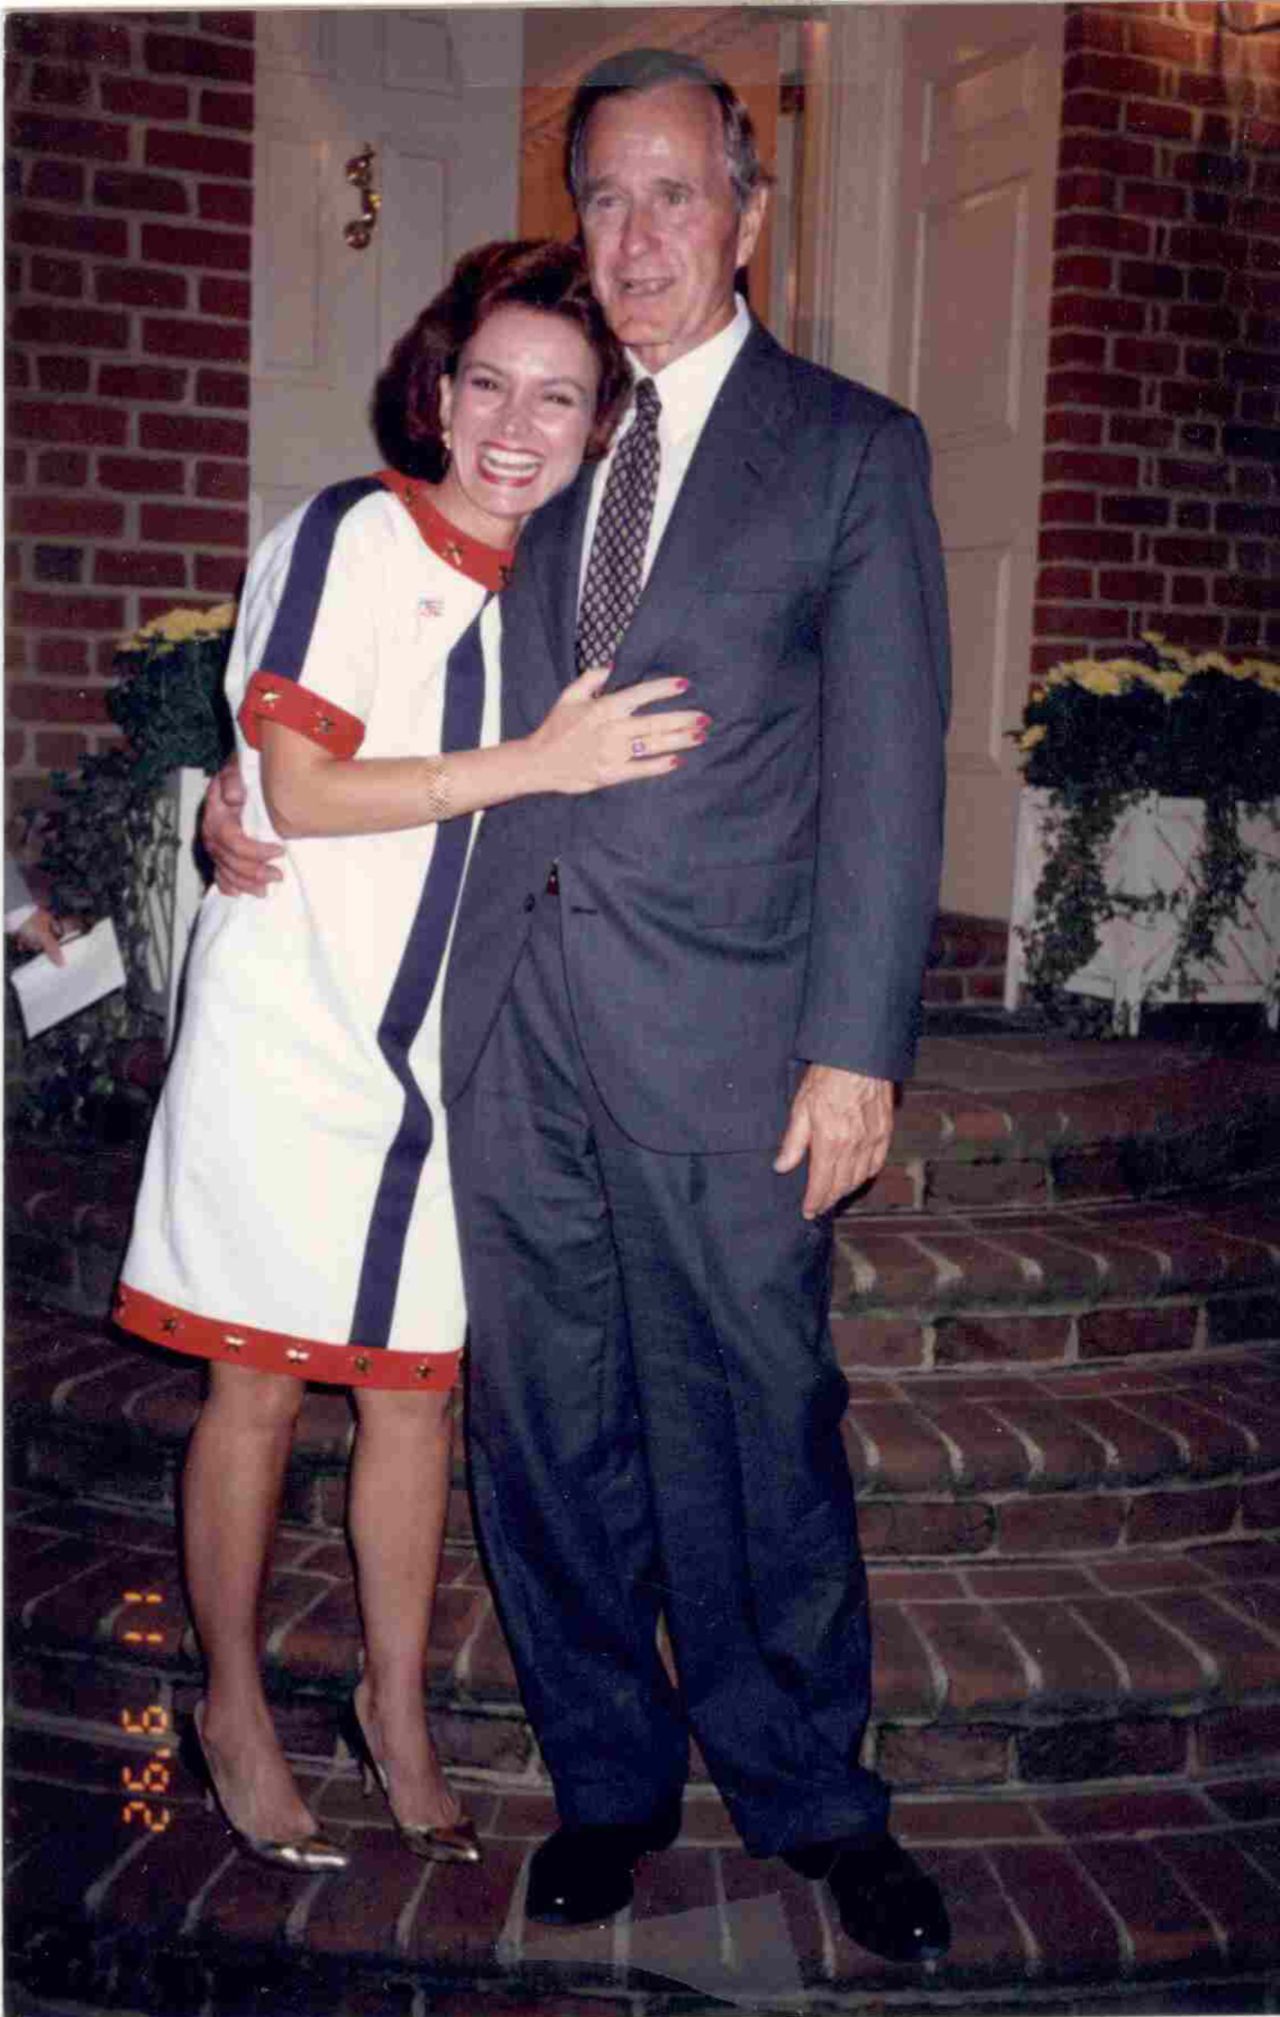 Costa appears with President George H.W. Bush at the fall 1992 reception at Robertson's home.